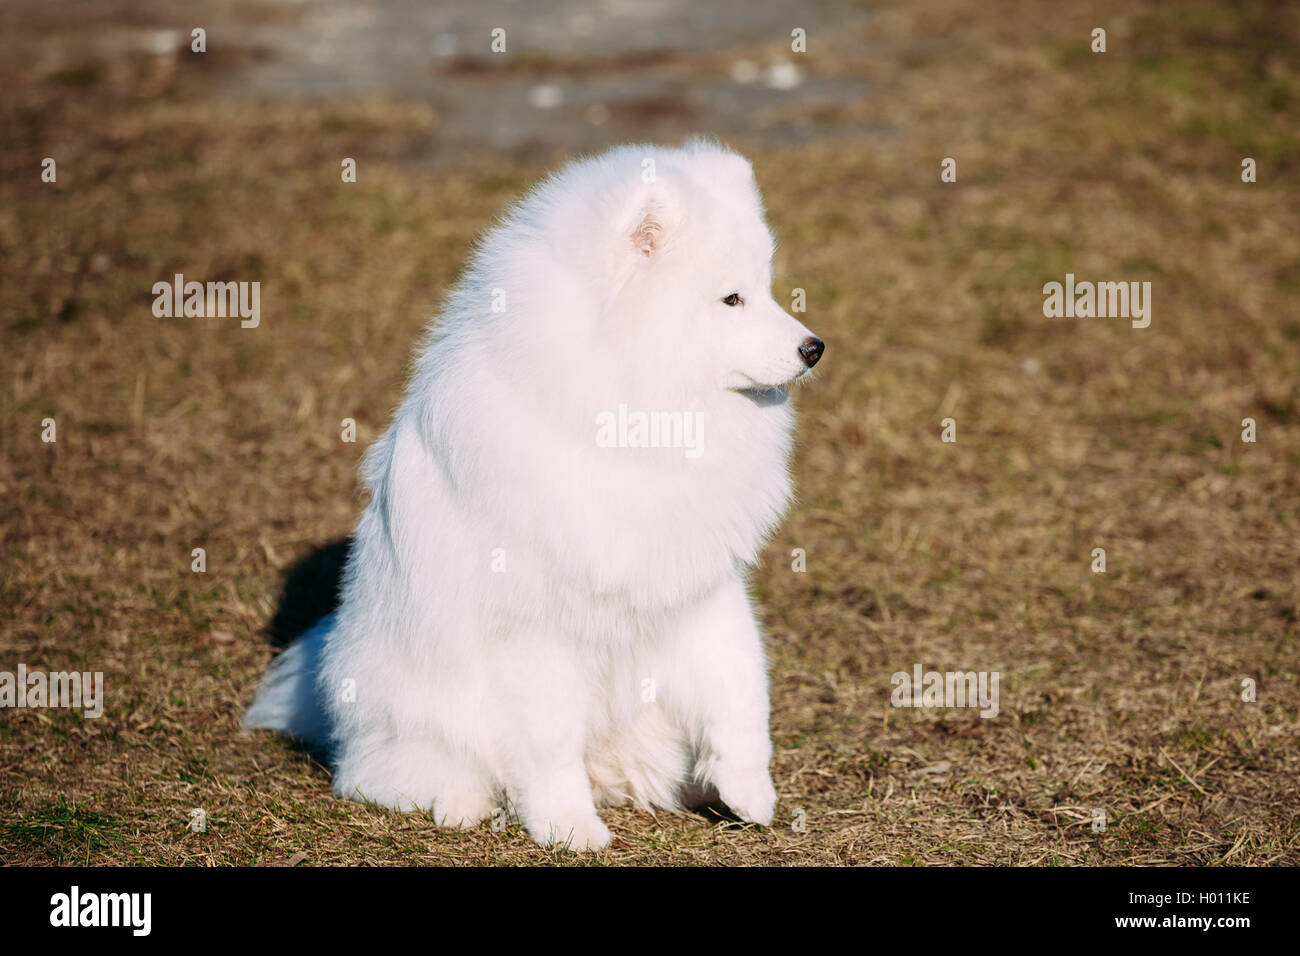 Lovely Young White Samoyed Dog Outdoor in Park. Stock Photo